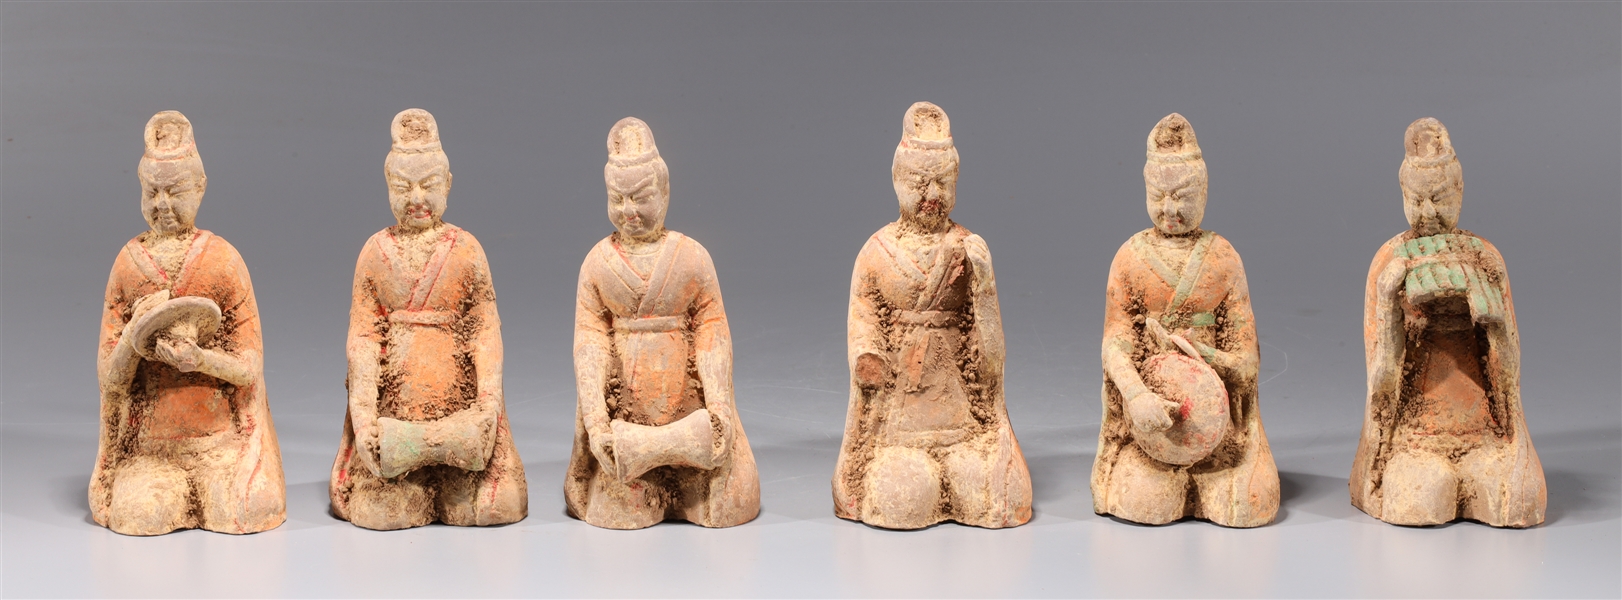 Group of Six Early Style Chinese Ceramic Musicians